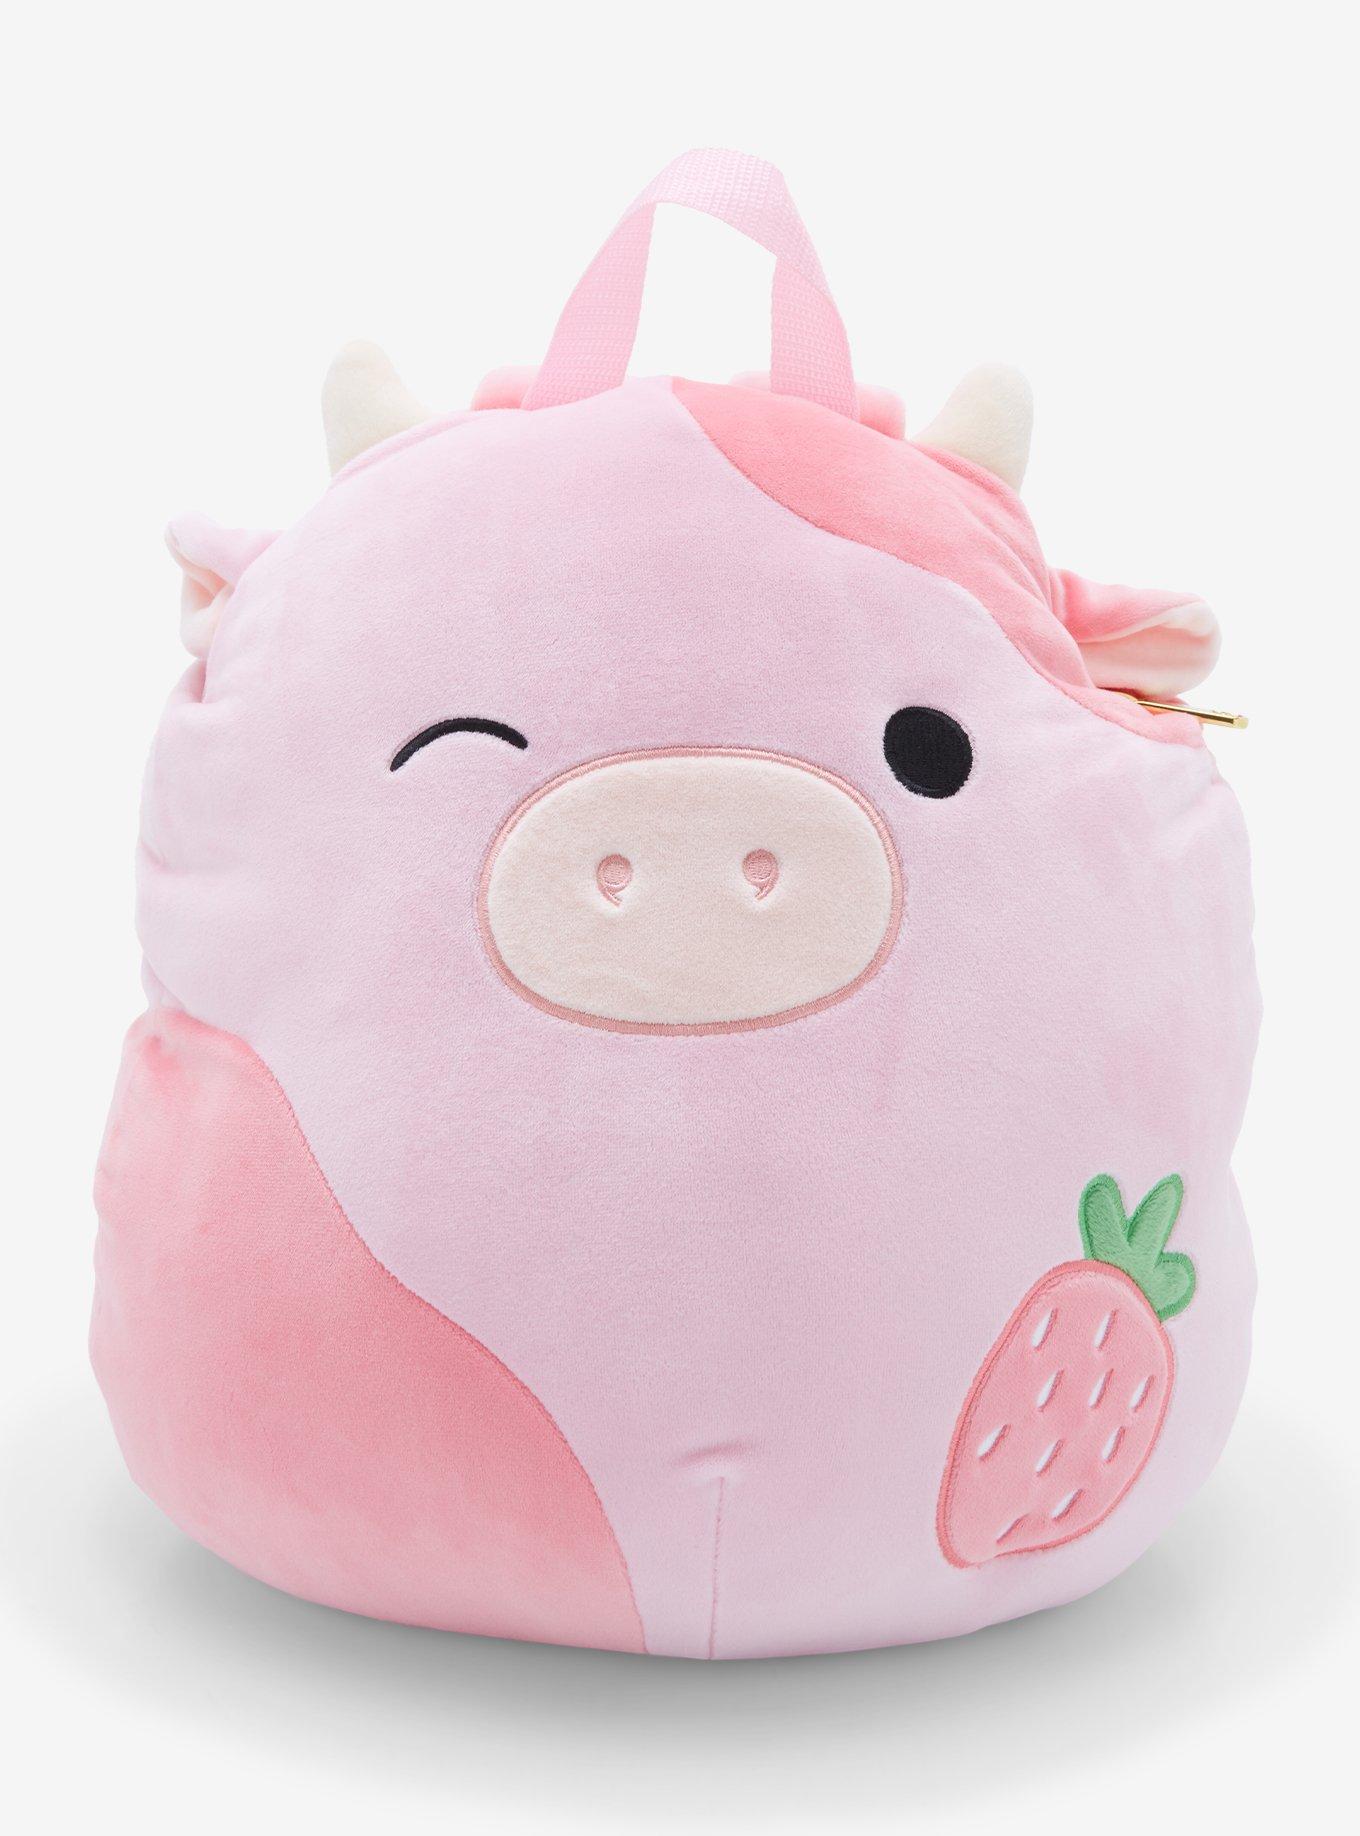 Why doesn't the Harry Potter squishmallows have names? : r/squishmallow